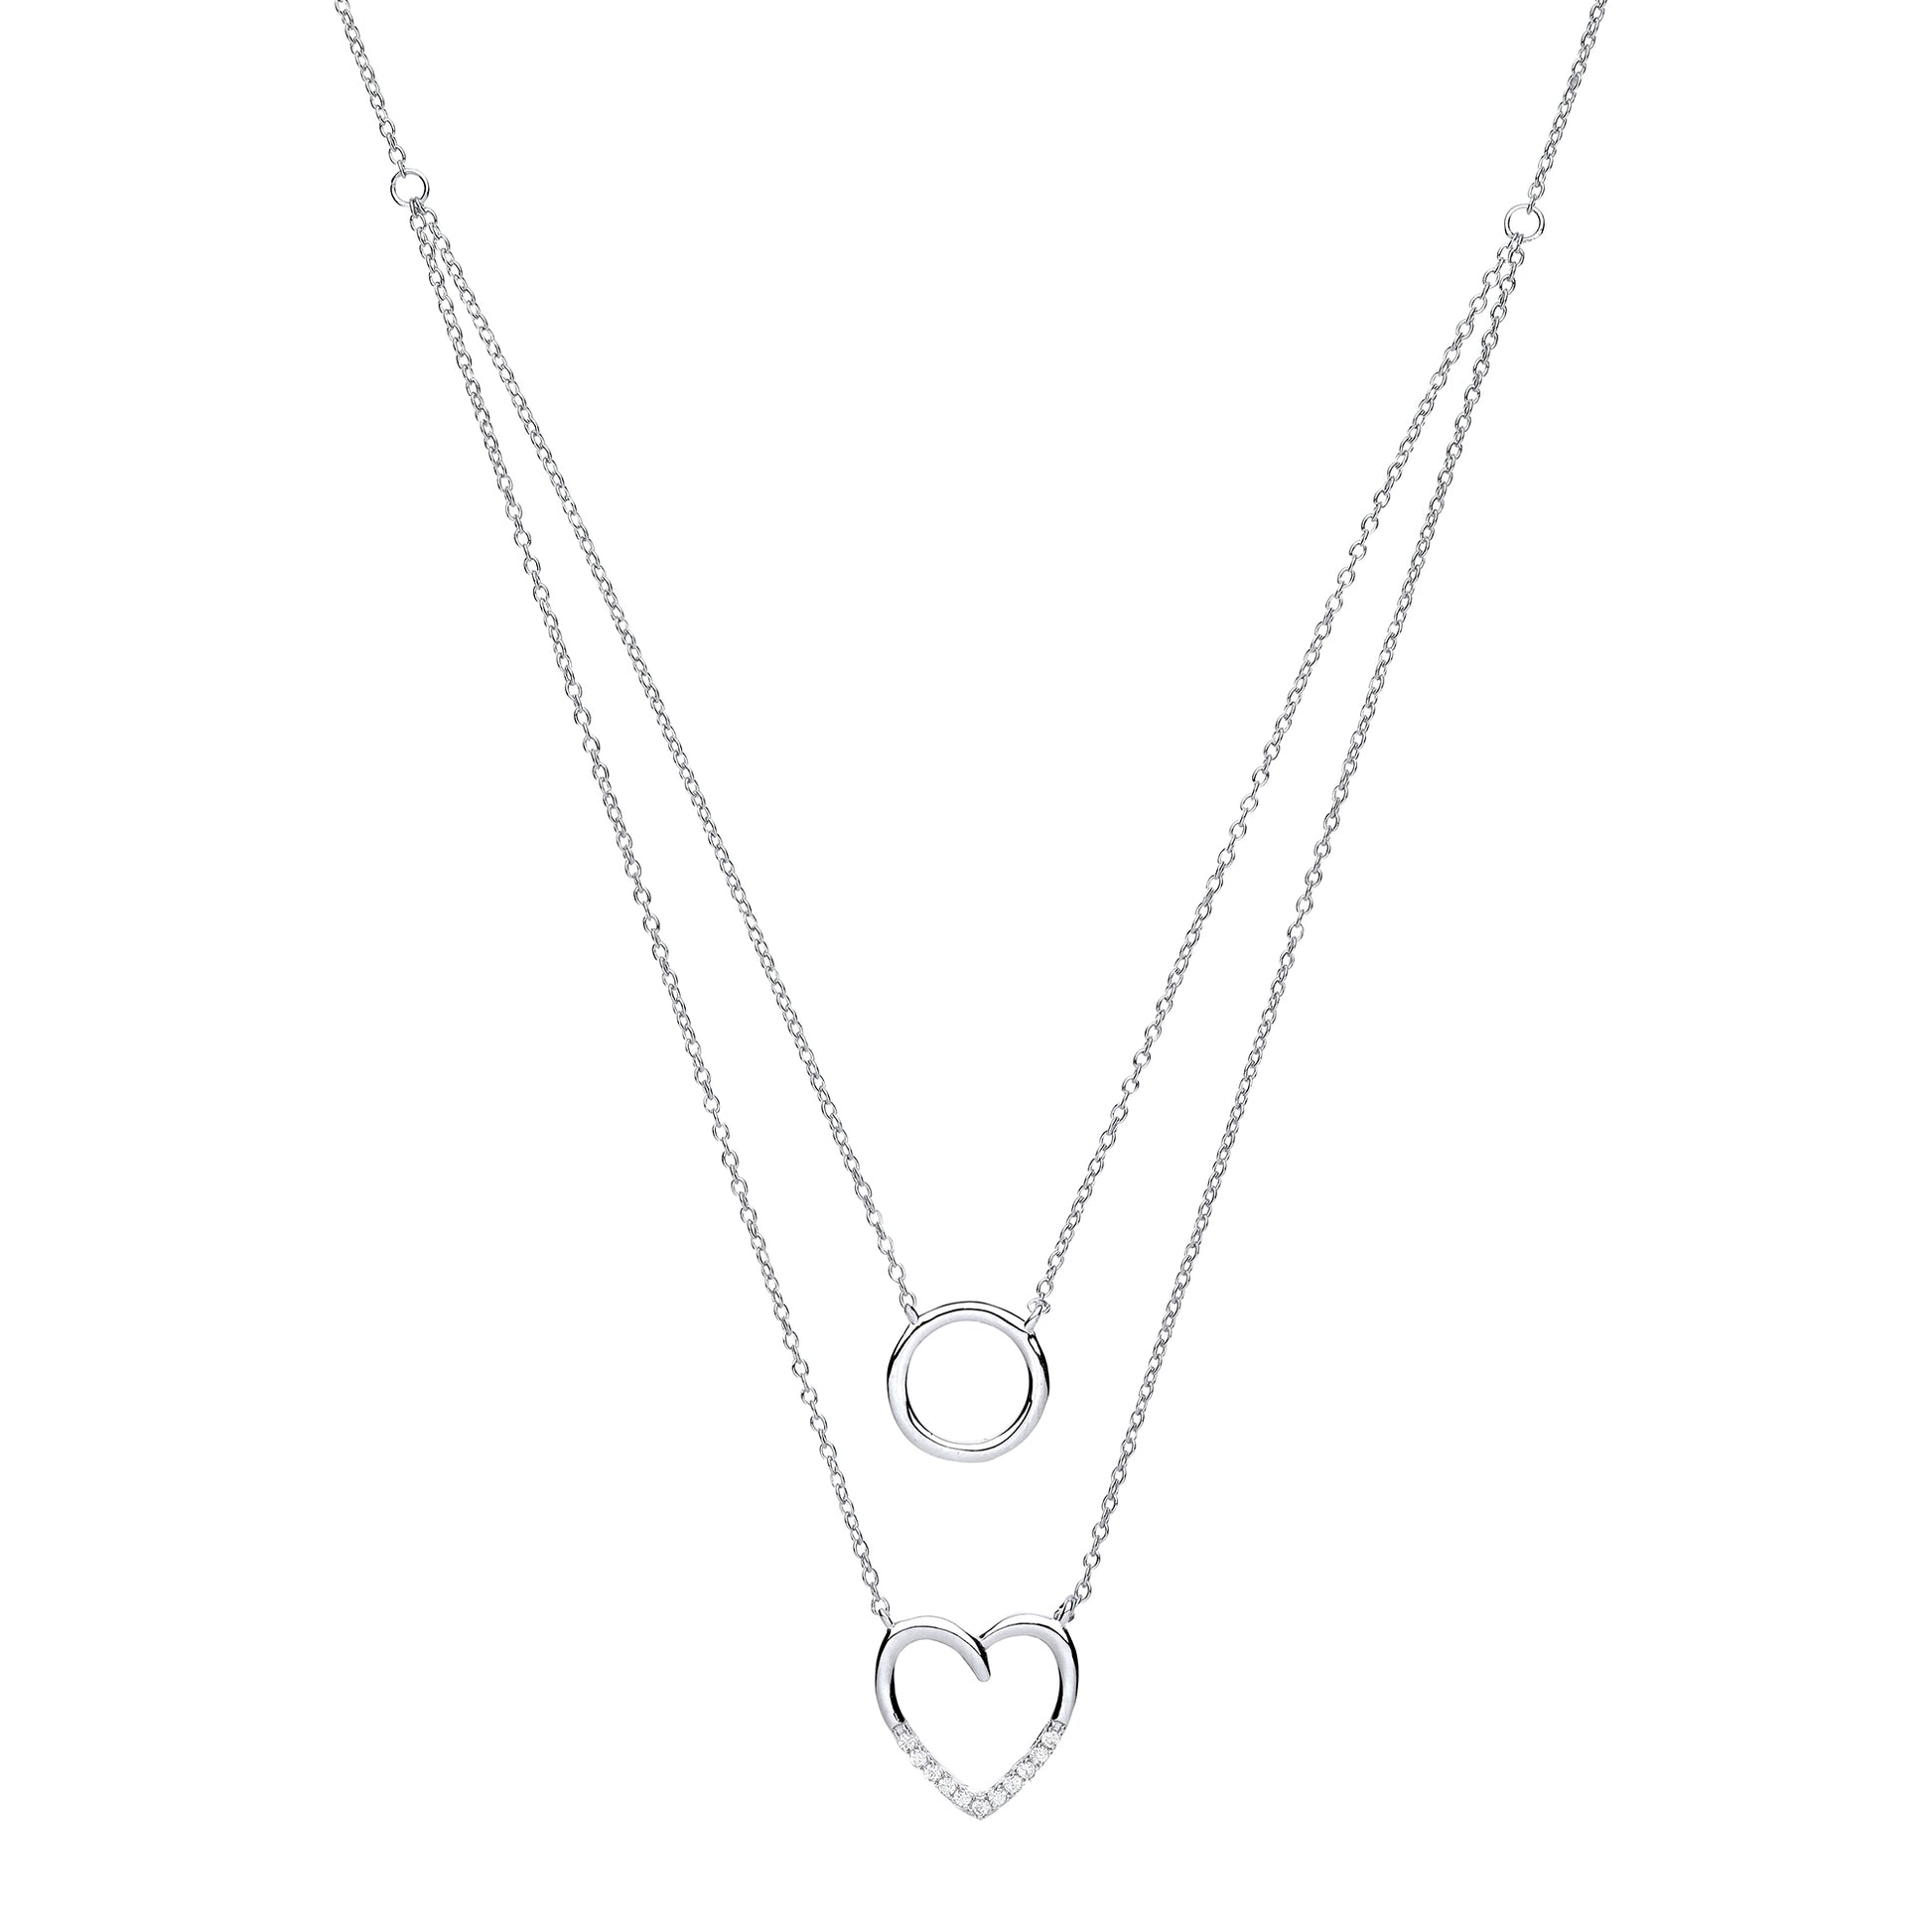 Silver  CZ Love Heart Halo Charm Double Drop Necklace 16 inch - GVK231